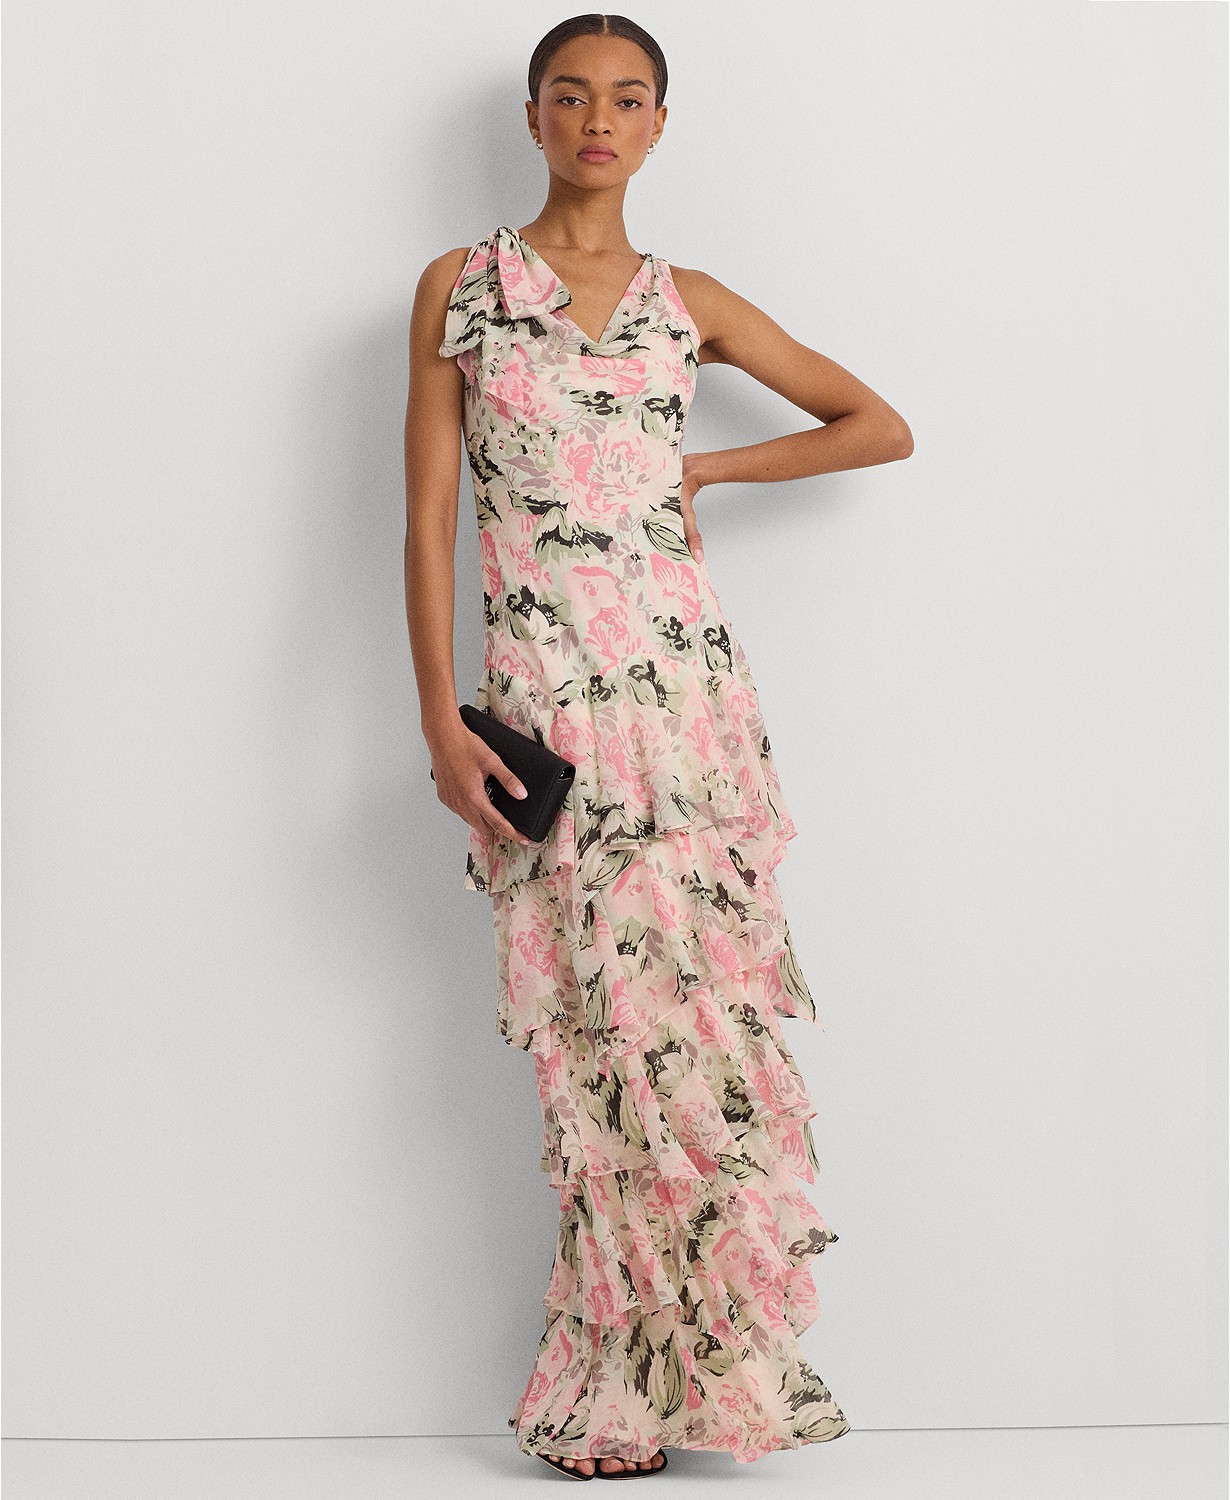 Womens Tiered Ruffled A-Line Gown